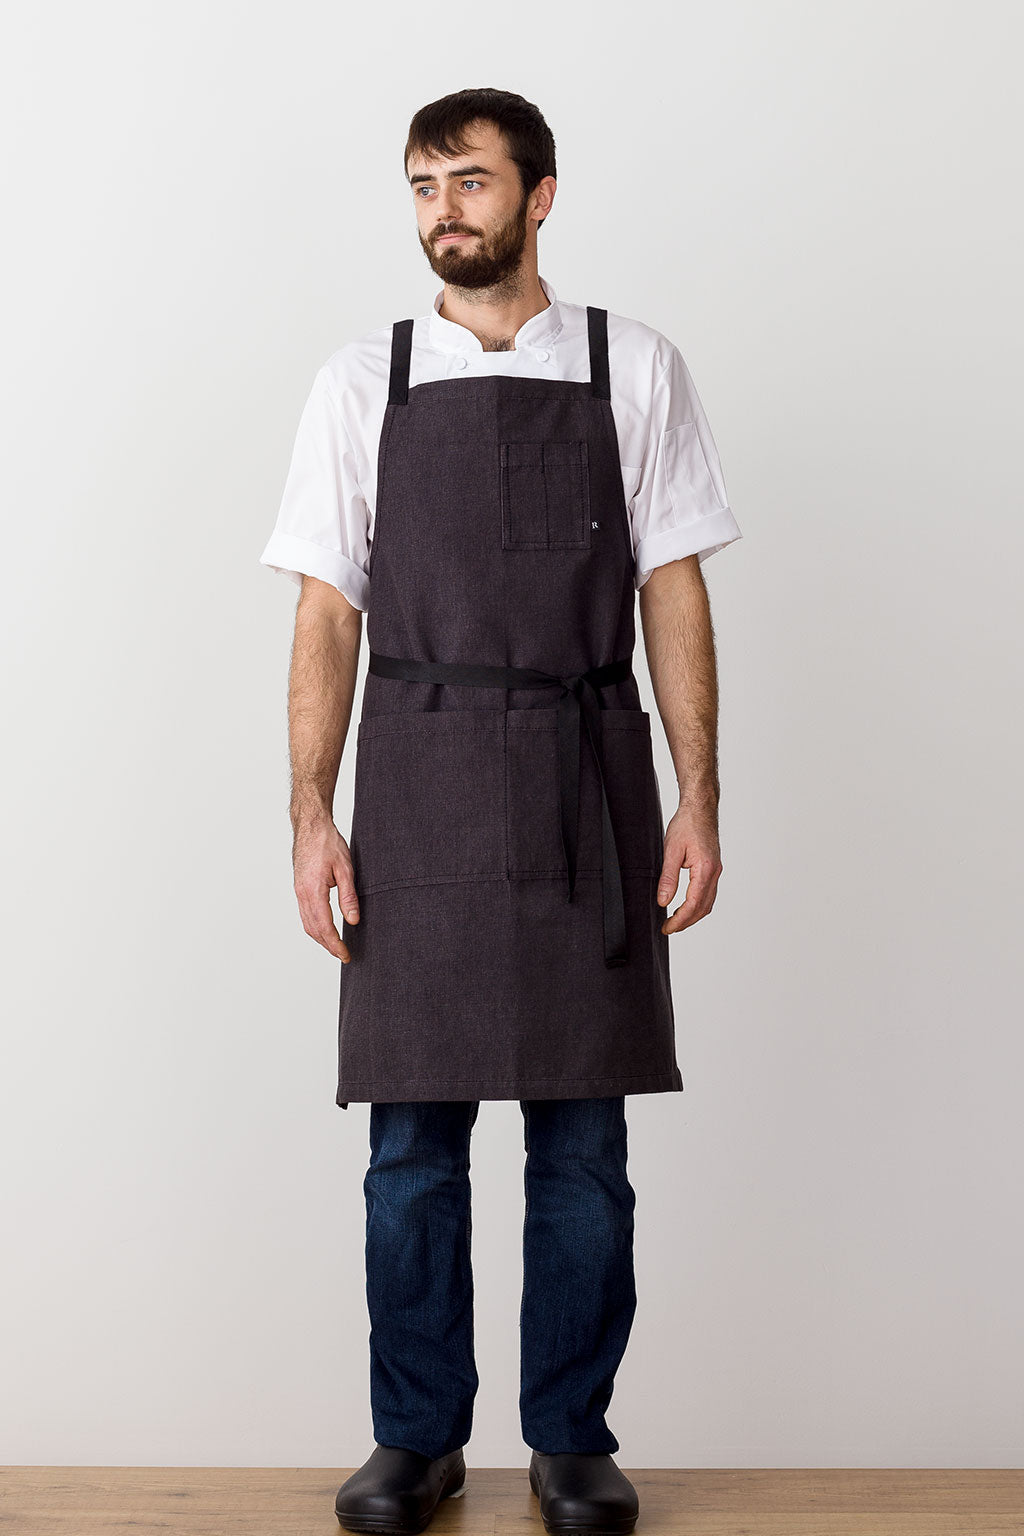 Cross Back Apron Black Charcoal Durable Restaurant Quality Reluctant Threads